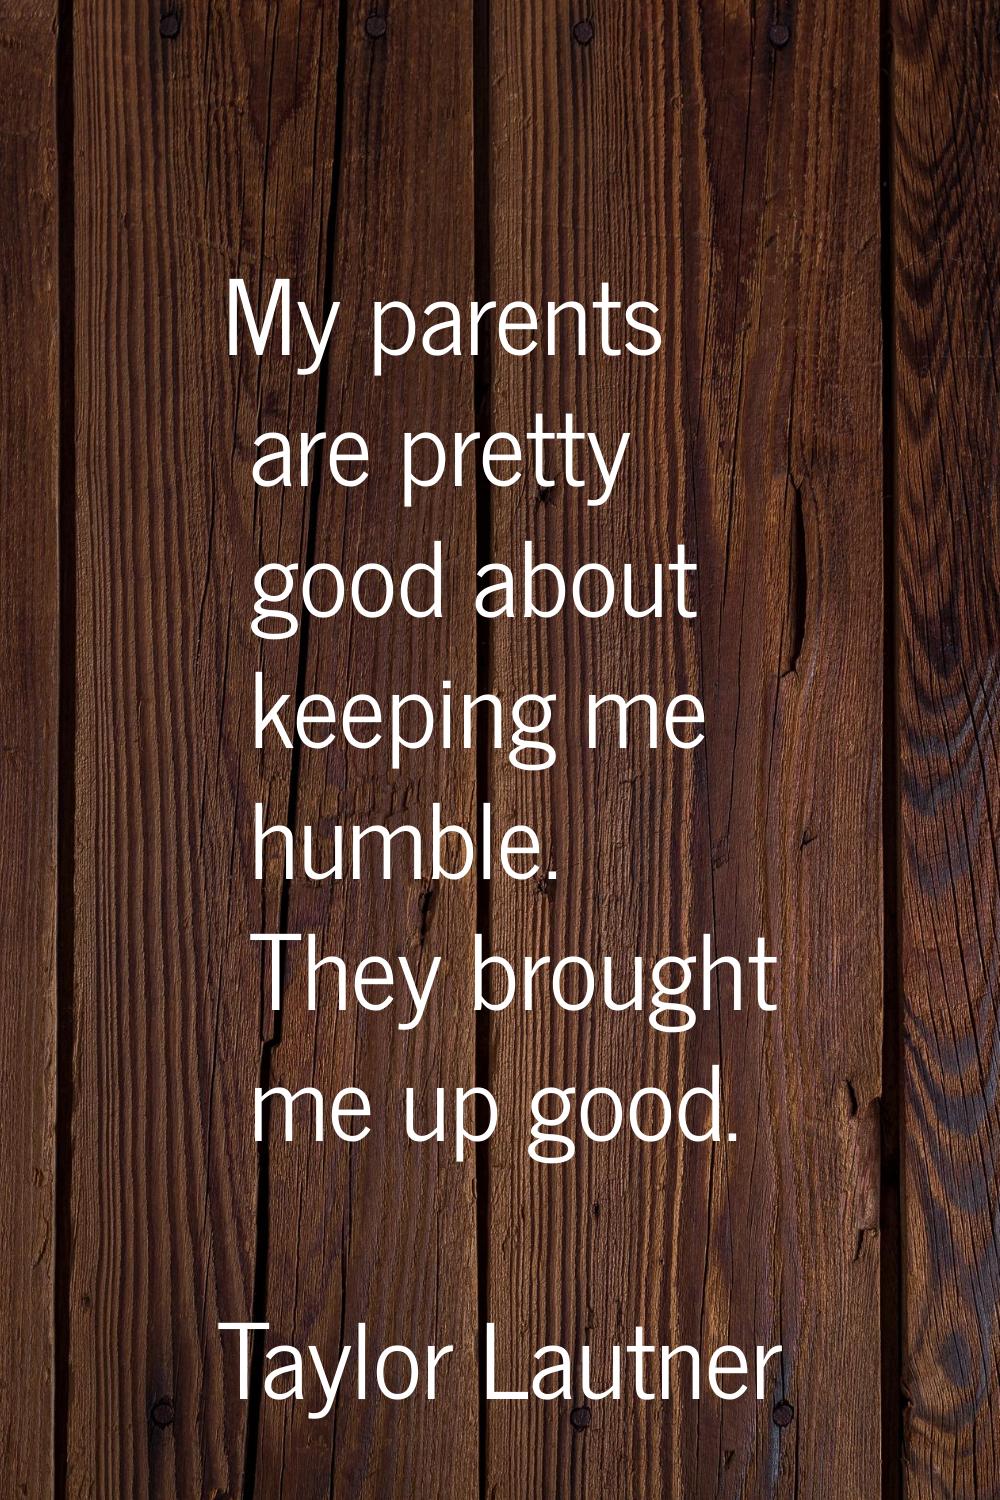 My parents are pretty good about keeping me humble. They brought me up good.